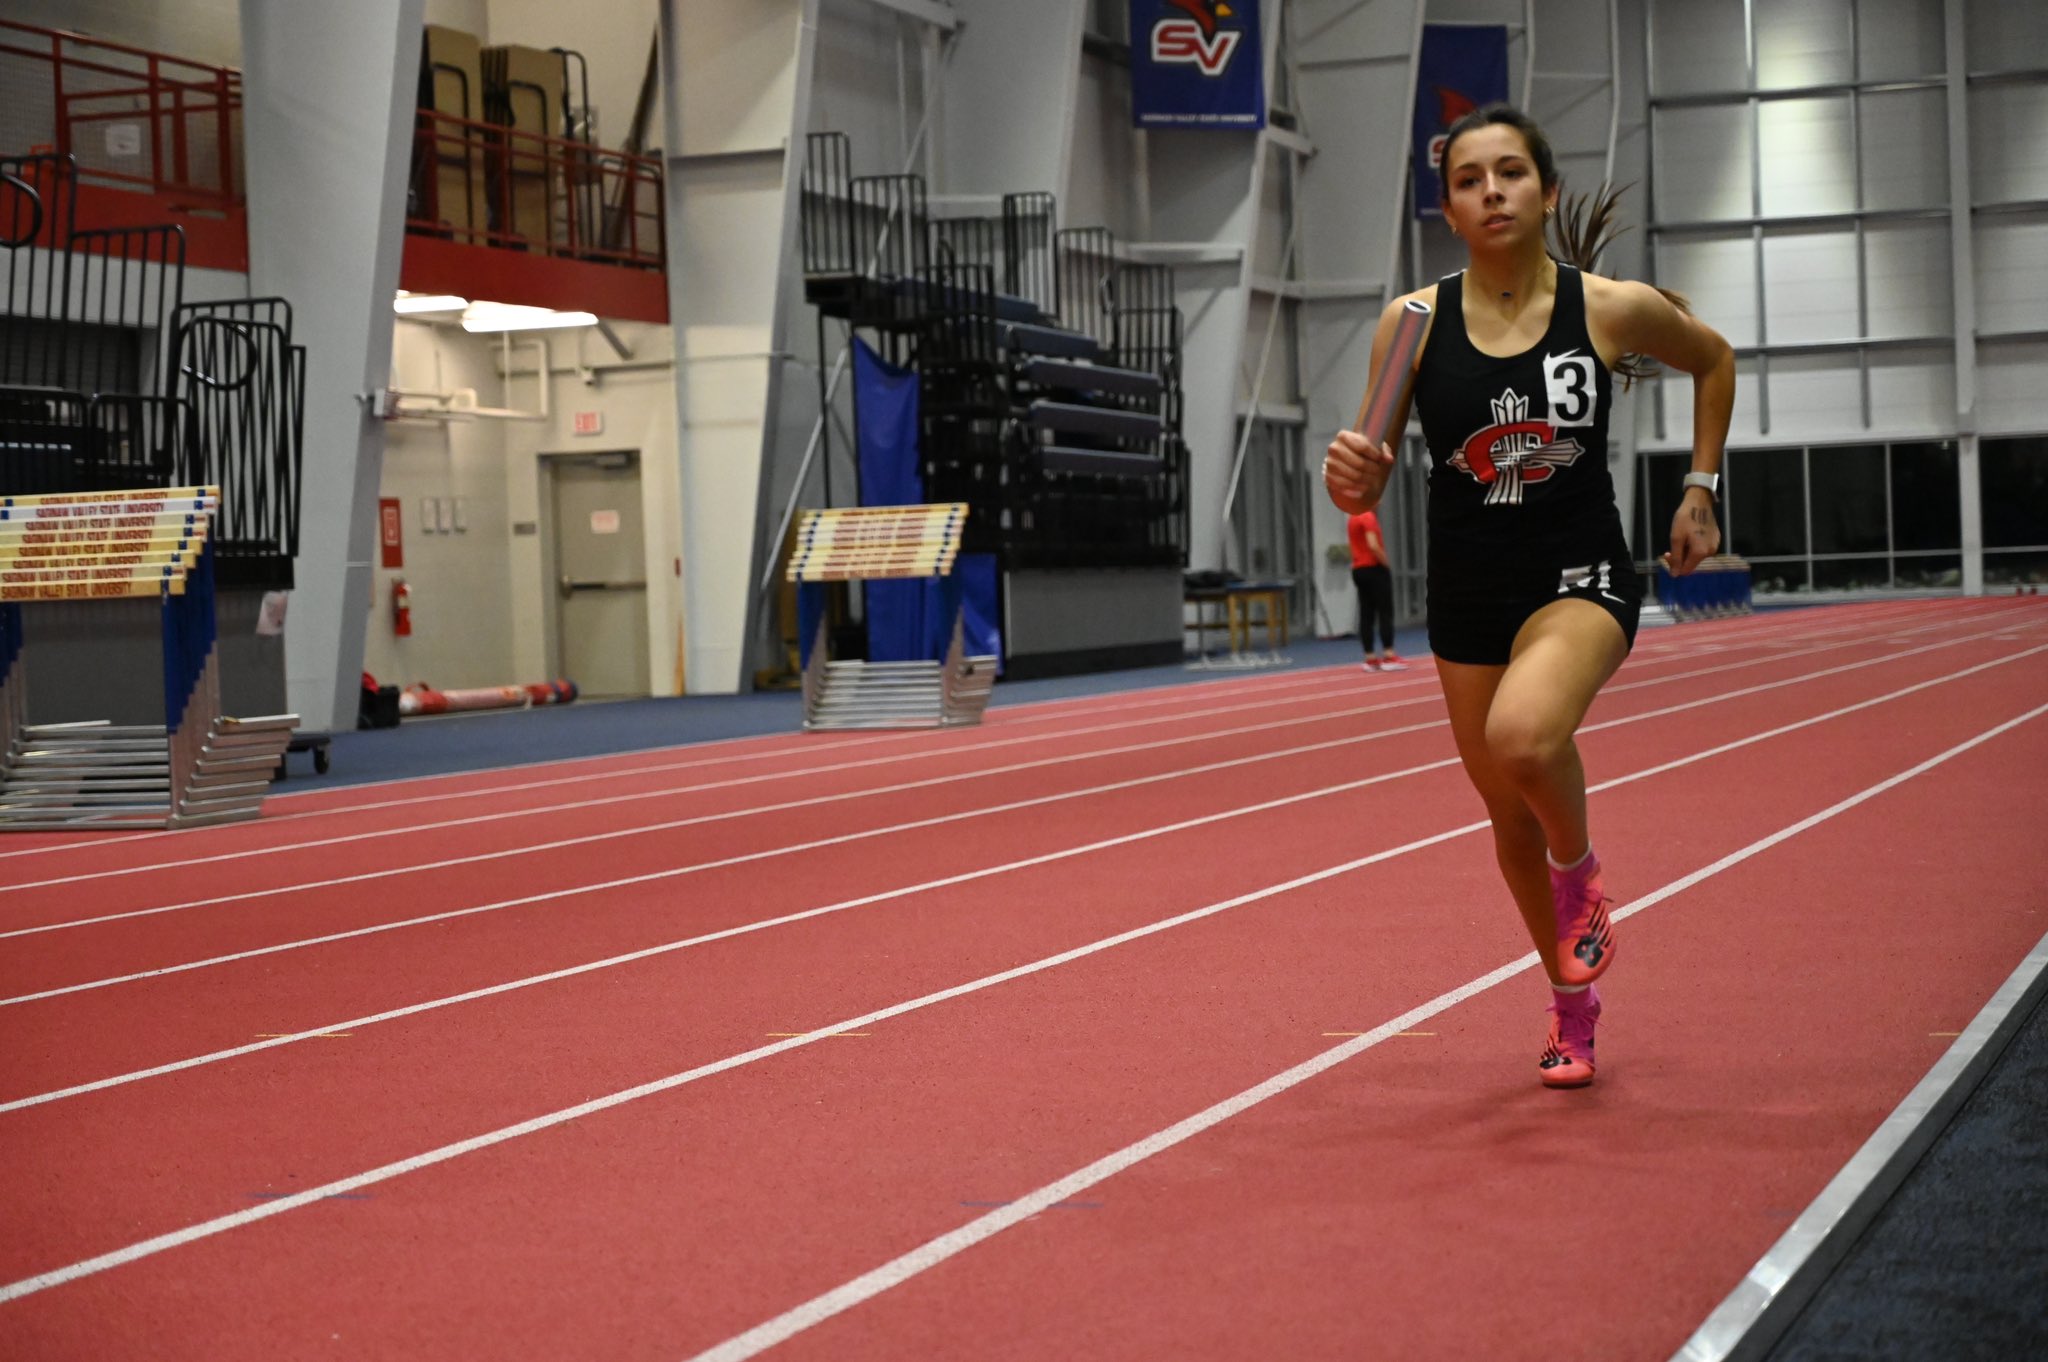 Women's Track & Field continues to improve at the Doug Hansen Open